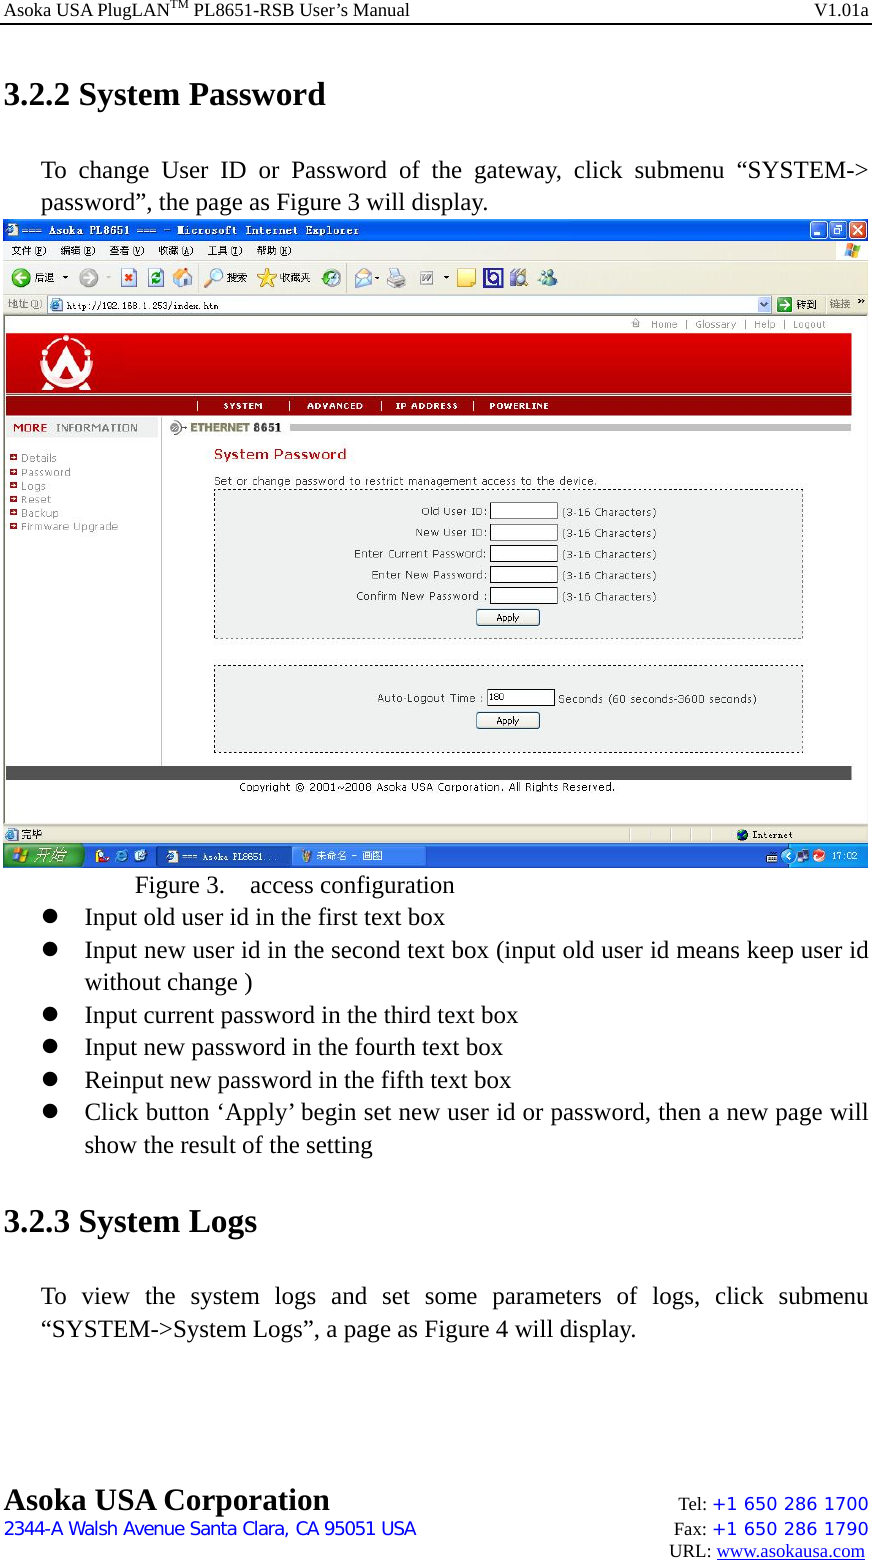 Asoka USA PlugLANTM PL8651-RSB User’s Manual    V1.01a 3.2.2 System Password To change User ID or Password of the gateway, click submenu “SYSTEM-&gt; password”, the page as Figure 3 will display.     Figure 3.  access configuration z Input old user id in the first text box z Input new user id in the second text box (input old user id means keep user id without change ) z Input current password in the third text box z Input new password in the fourth text box z Reinput new password in the fifth text box z Click button ‘Apply’ begin set new user id or password, then a new page will show the result of the setting 3.2.3 System Logs To view the system logs and set some parameters of logs, click submenu “SYSTEM-&gt;System Logs”, a page as Figure 4 will display. Asoka USA Corporation    Tel: +1 650 286 1700    2344-A Walsh Avenue Santa Clara, CA 95051 USA   Fax: +1 650 286 1790                                                                                     URL: www.asokausa.com 